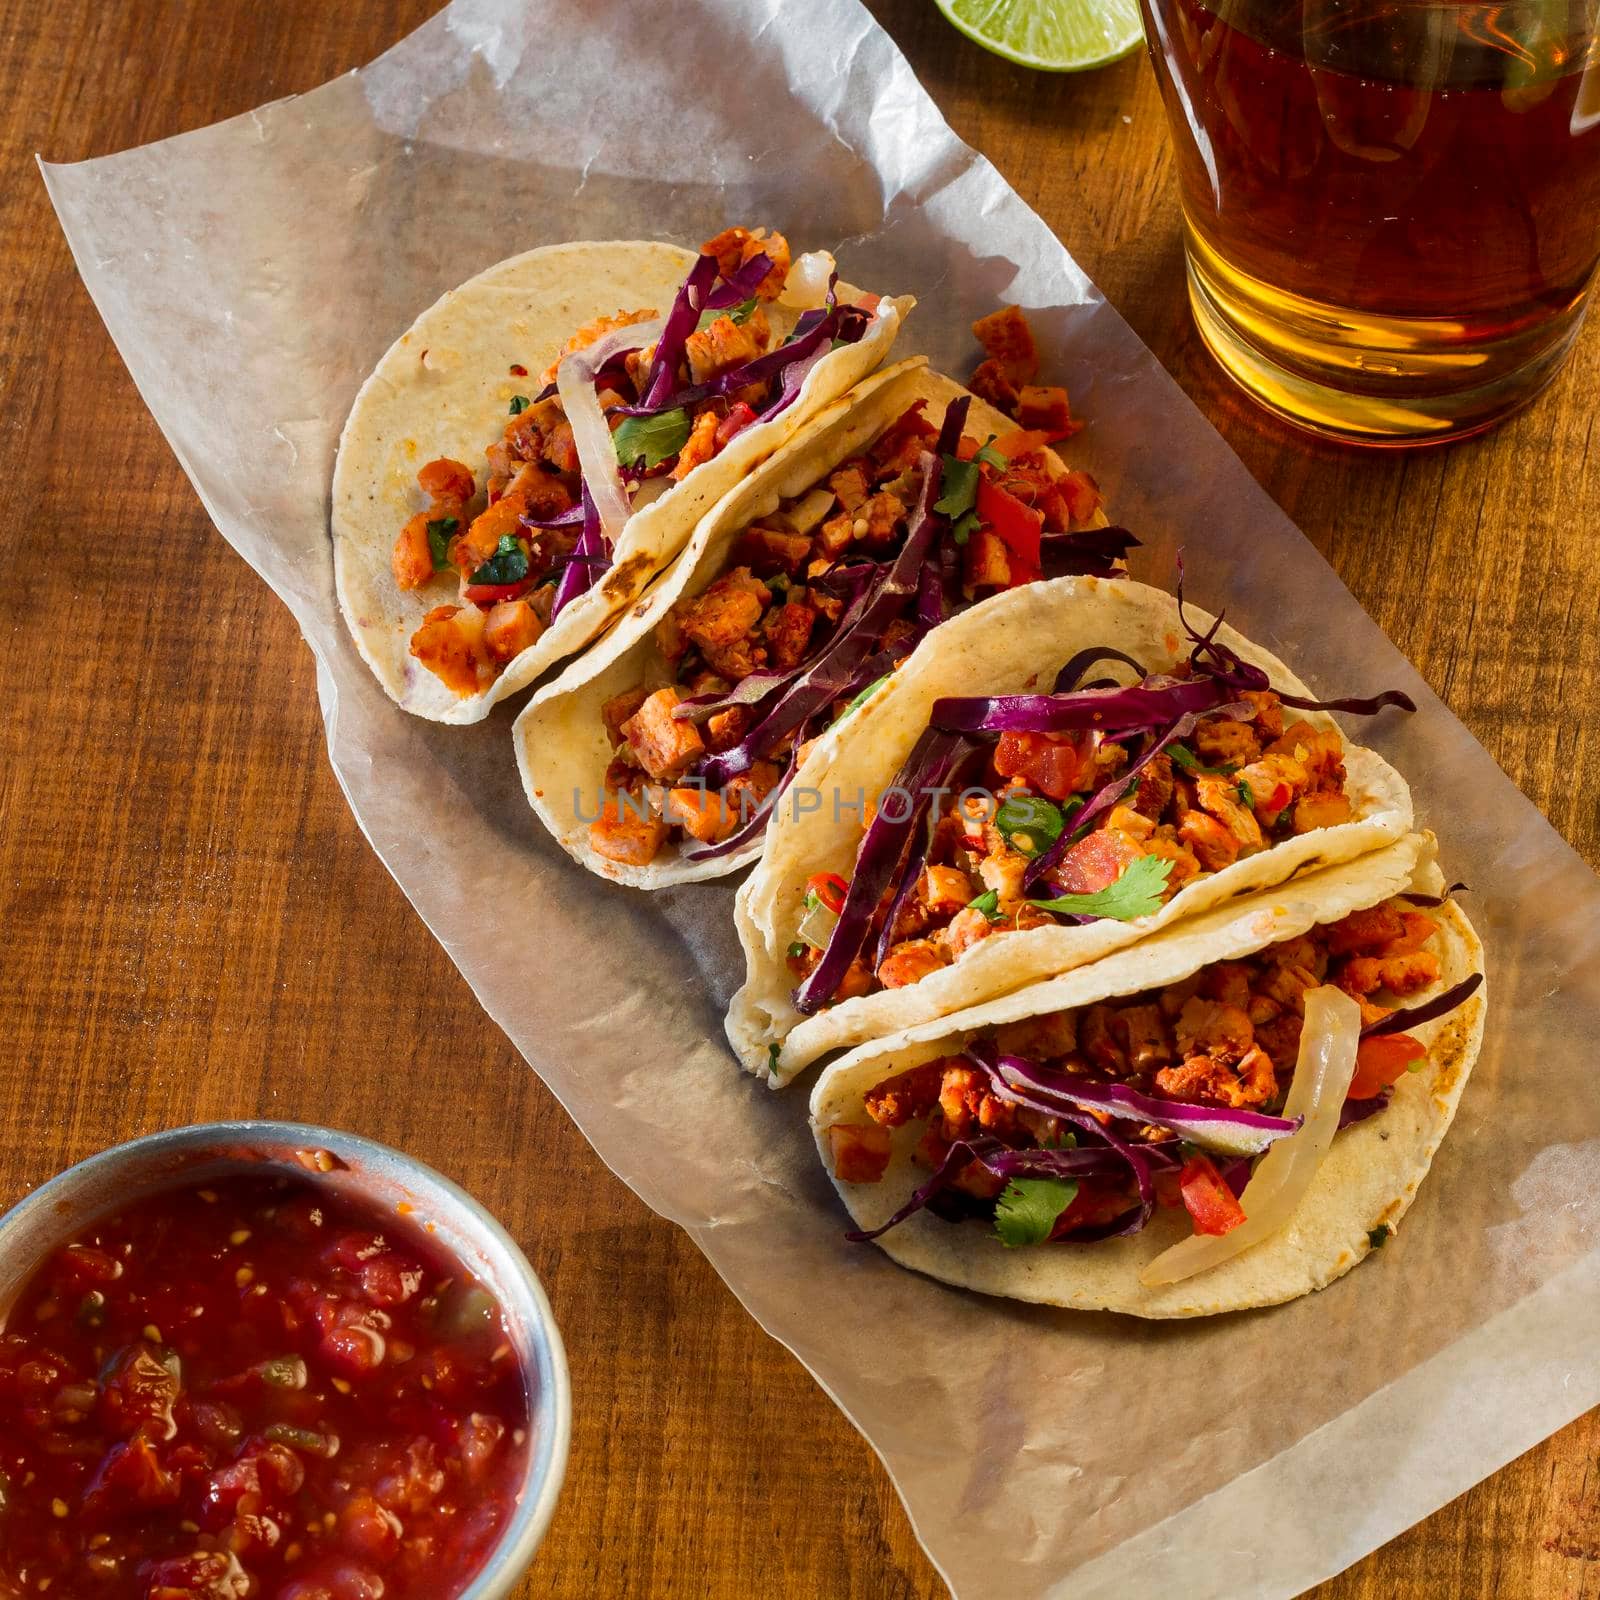 delicious tacos with sauce arrangement. High quality photo by Zahard